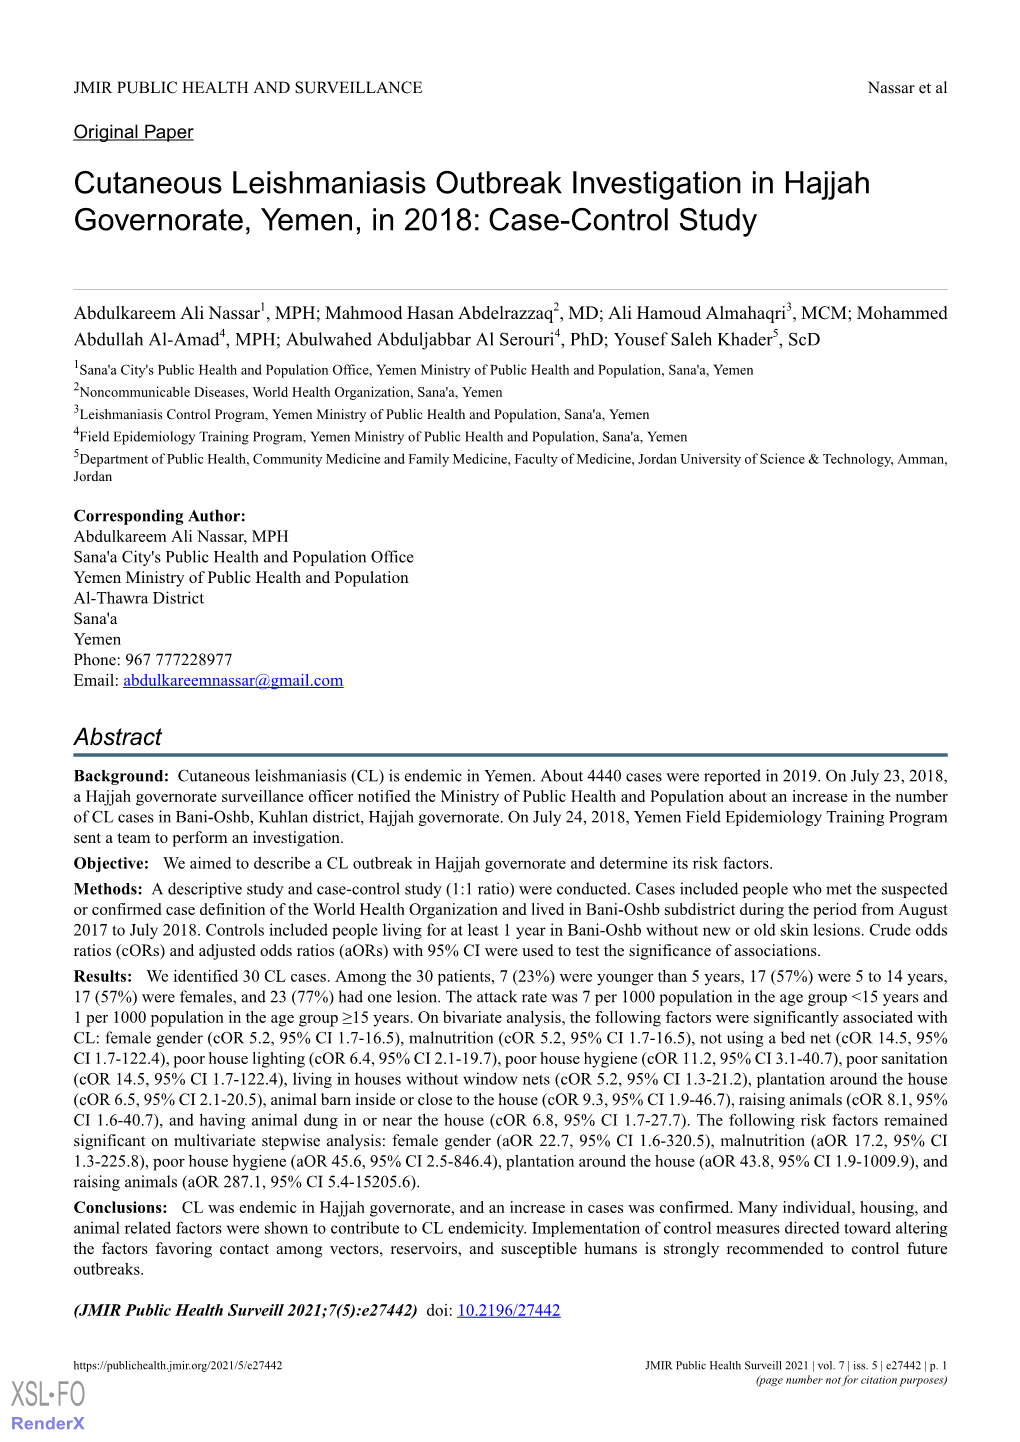 Cutaneous Leishmaniasis Outbreak Investigation in Hajjah Governorate, Yemen, in 2018: Case-Control Study